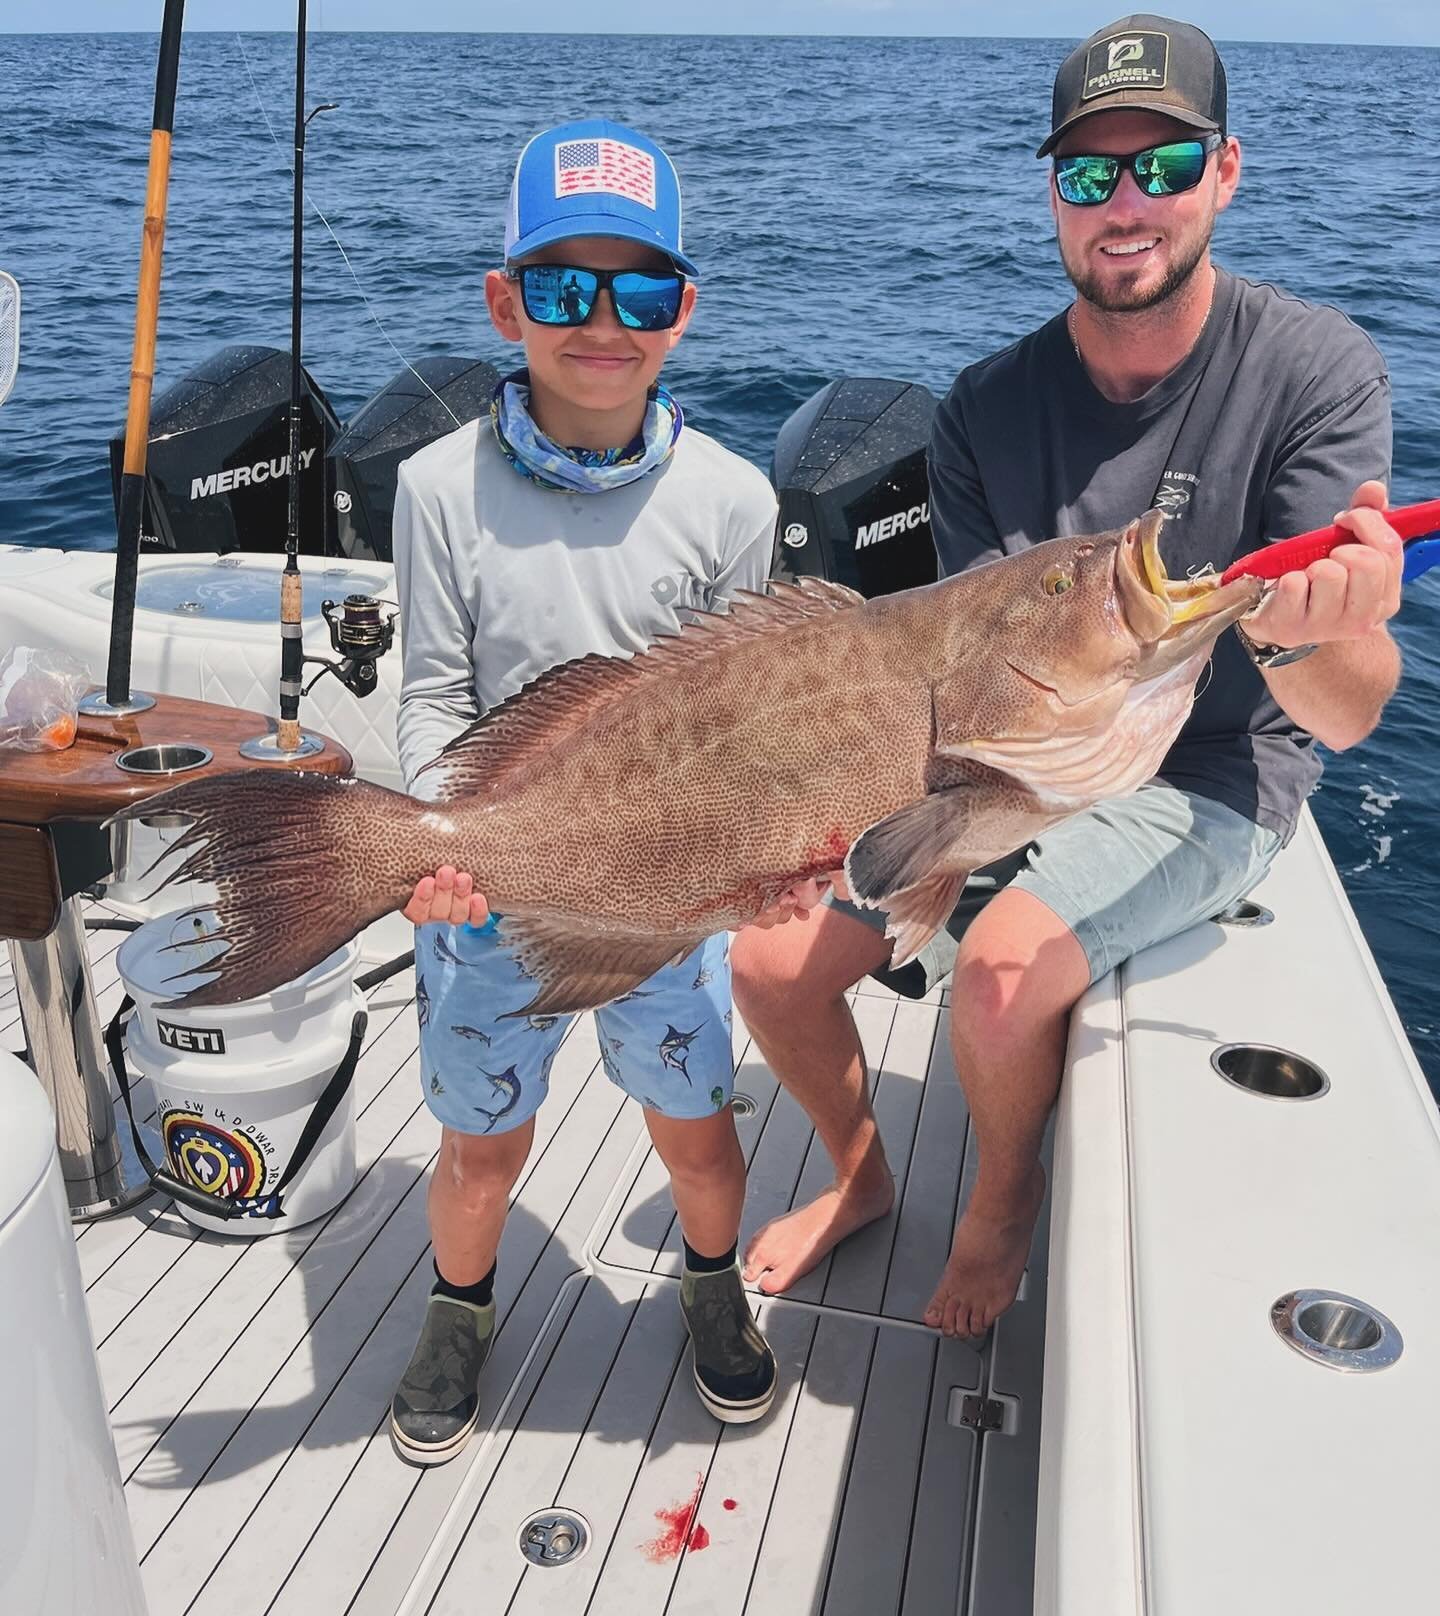 Peanut with a 24 pound scamp!! 
#takeakidfishing 
.
.
.

@SaltFeverGuideService&mdash;&gt; 910.250.3021
.
.
LIKE OUR PAGE TO FOLLOW THE SQUAD
🇺🇸🐟🇺🇸🐟🇺🇸🐟🇺🇸🐟🇺🇸🐟🇺🇸🐟🇺🇸🐟
.
@AmericanAquatic
.
.
| #SaltFeverGuideService | #AmericanAquati